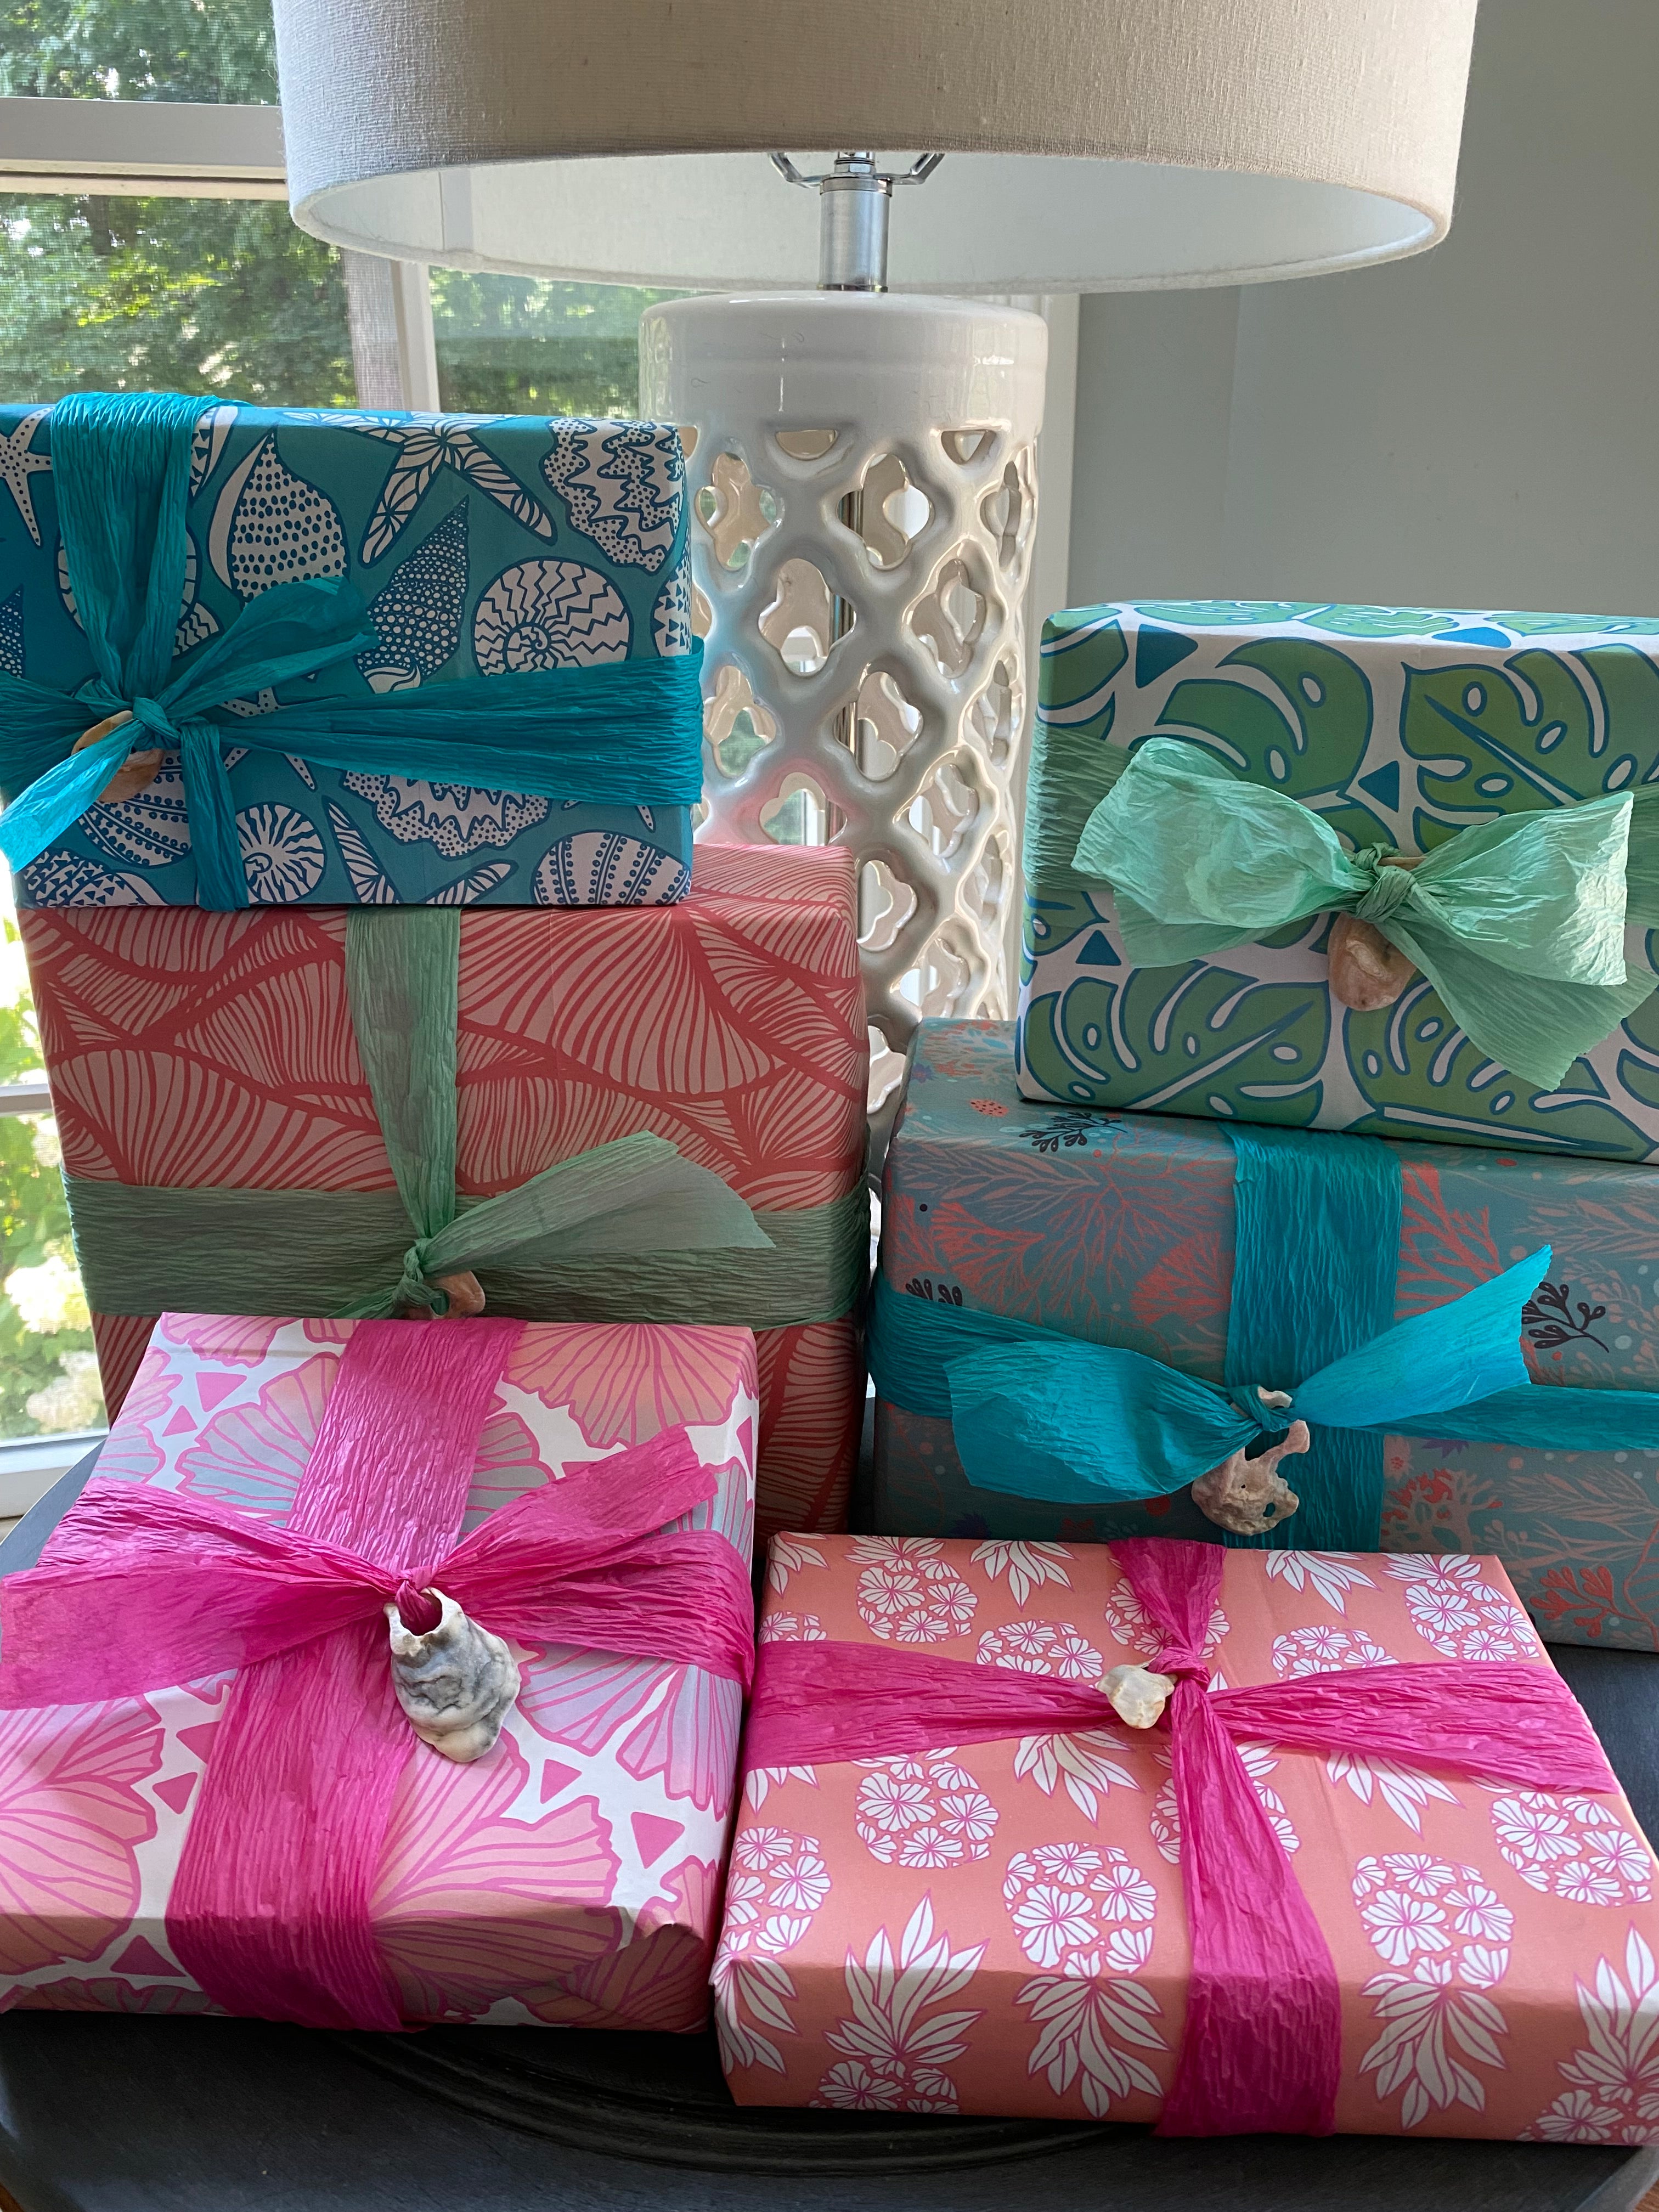 Gift Wrapping Service